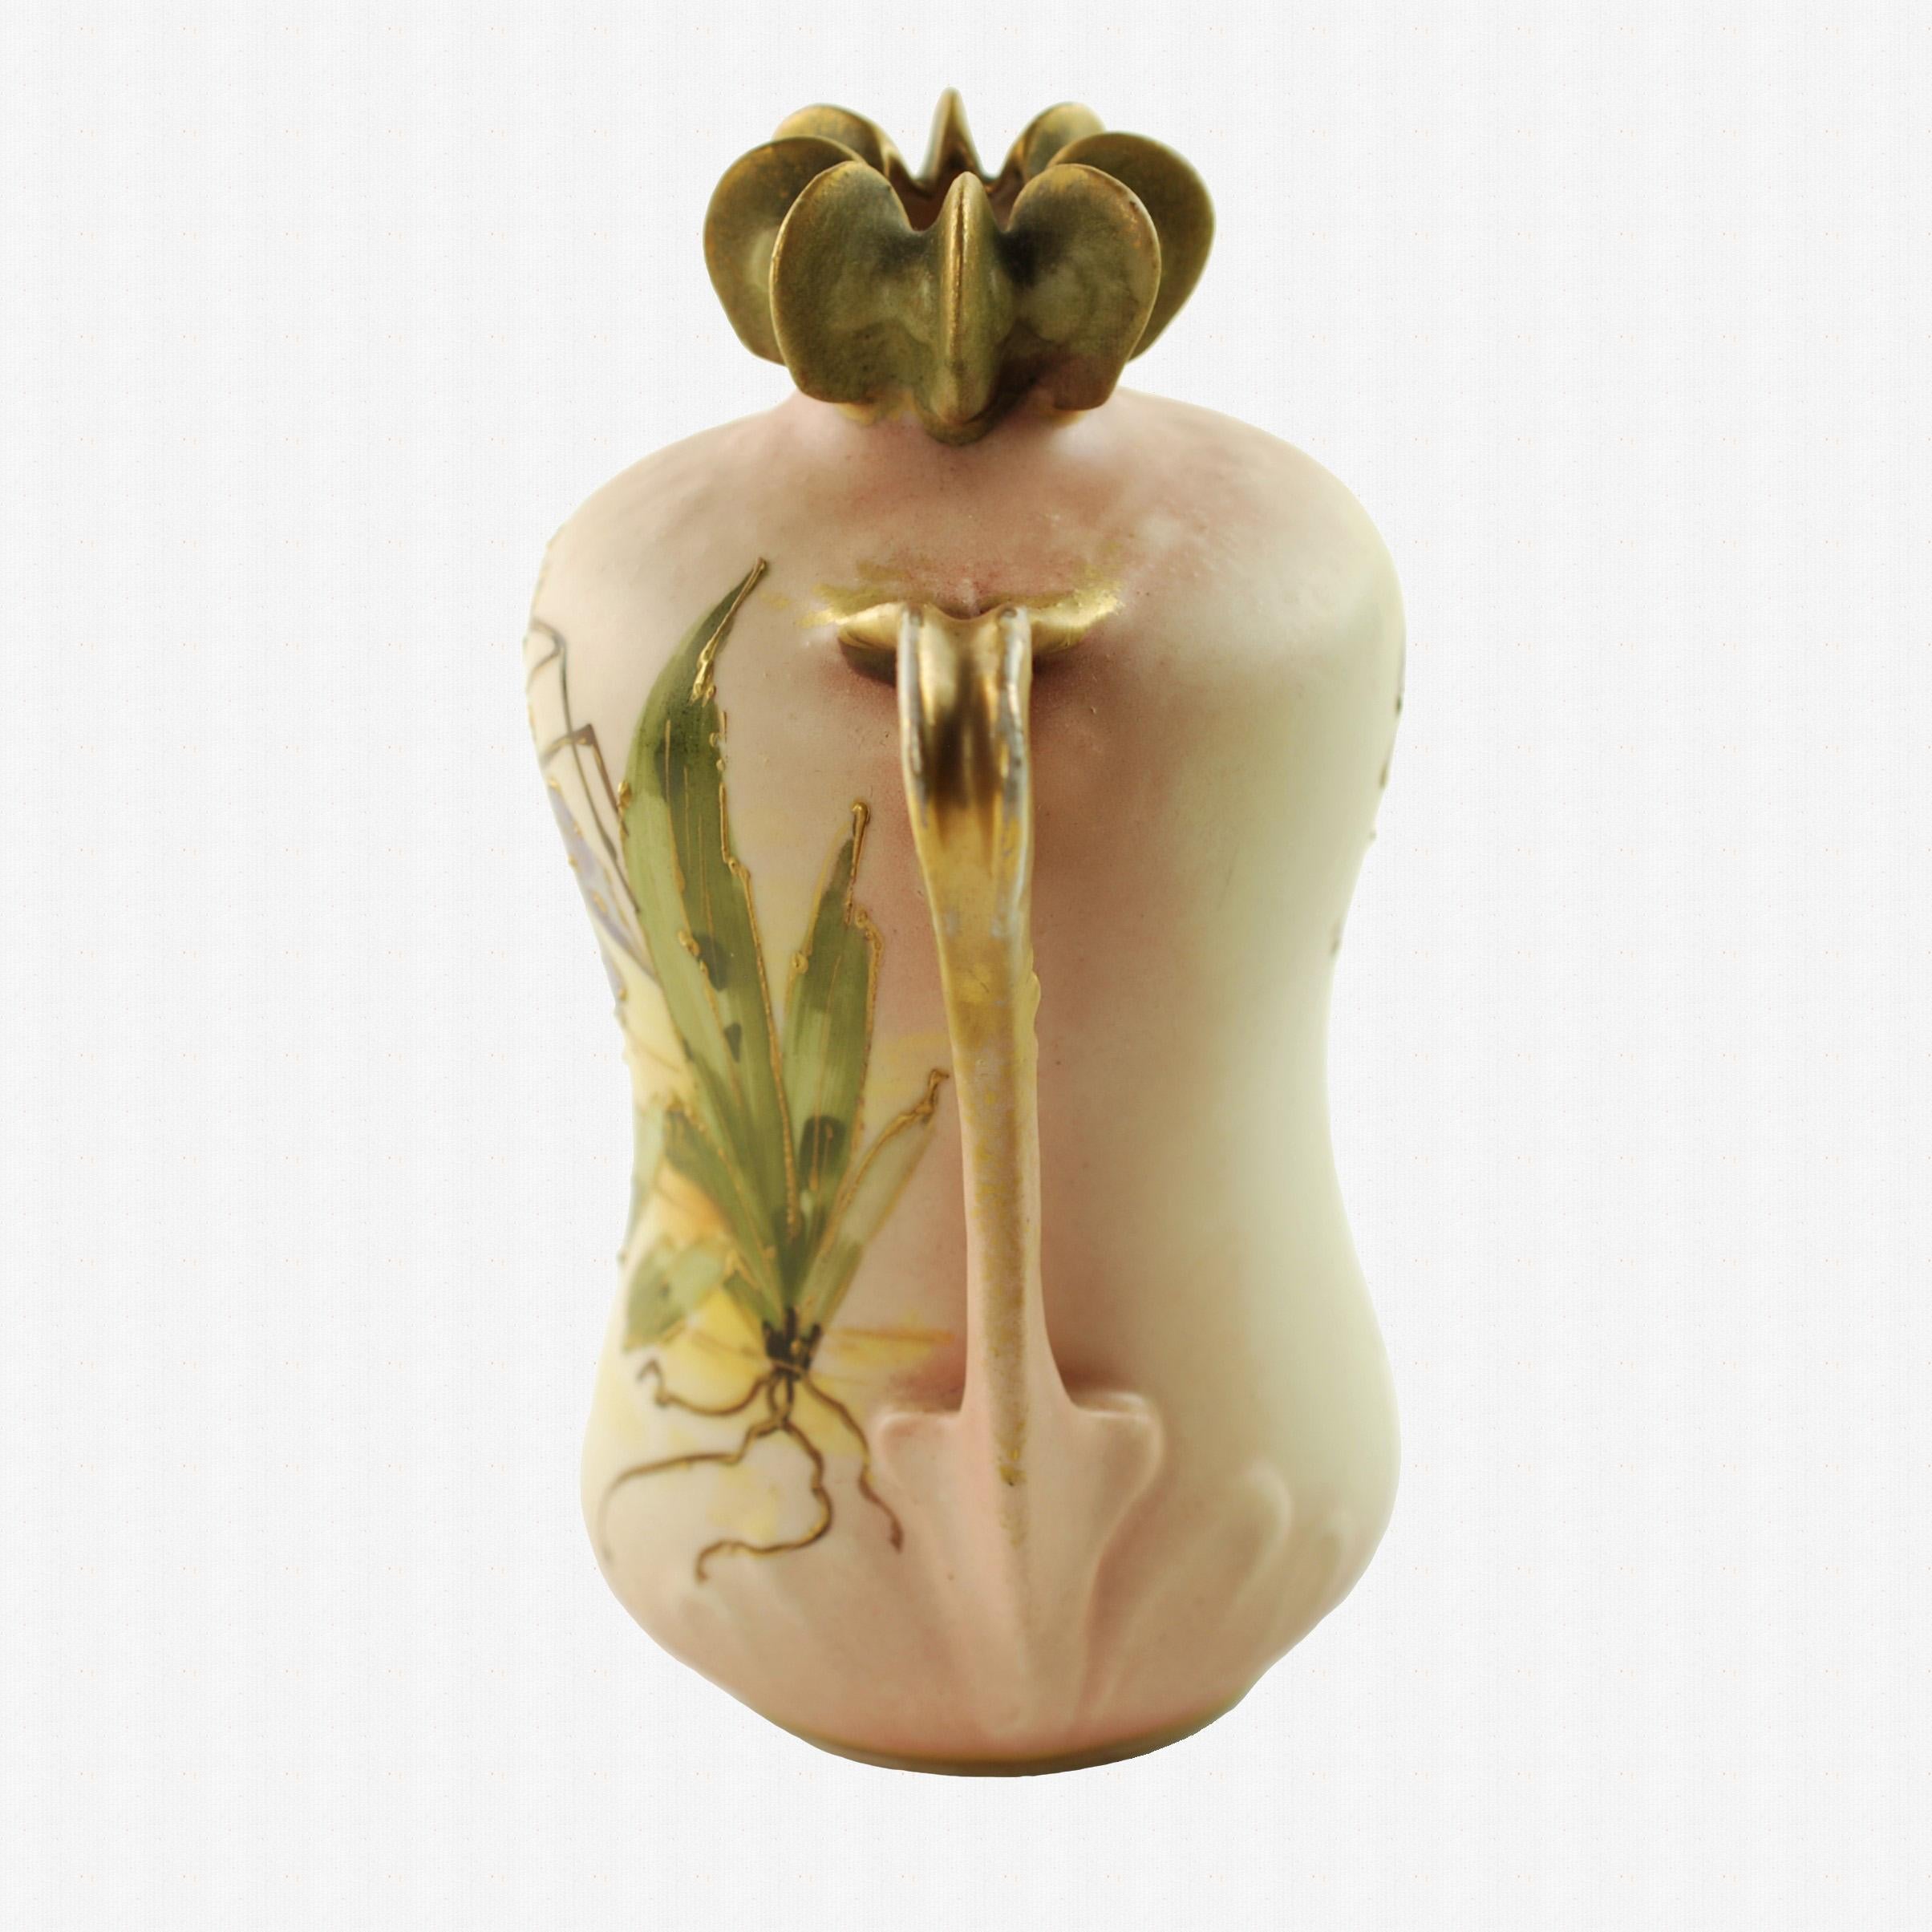 This early 20th century Art Nouveau porcelain vase was designed by Paul Dachsel for Riessner, Stellmacher & Kessel Amphora of Turn-Teplitz, Bohemia. The piece has an organic squash-like form and features Dachsel's distinctive ribbed mouth design at